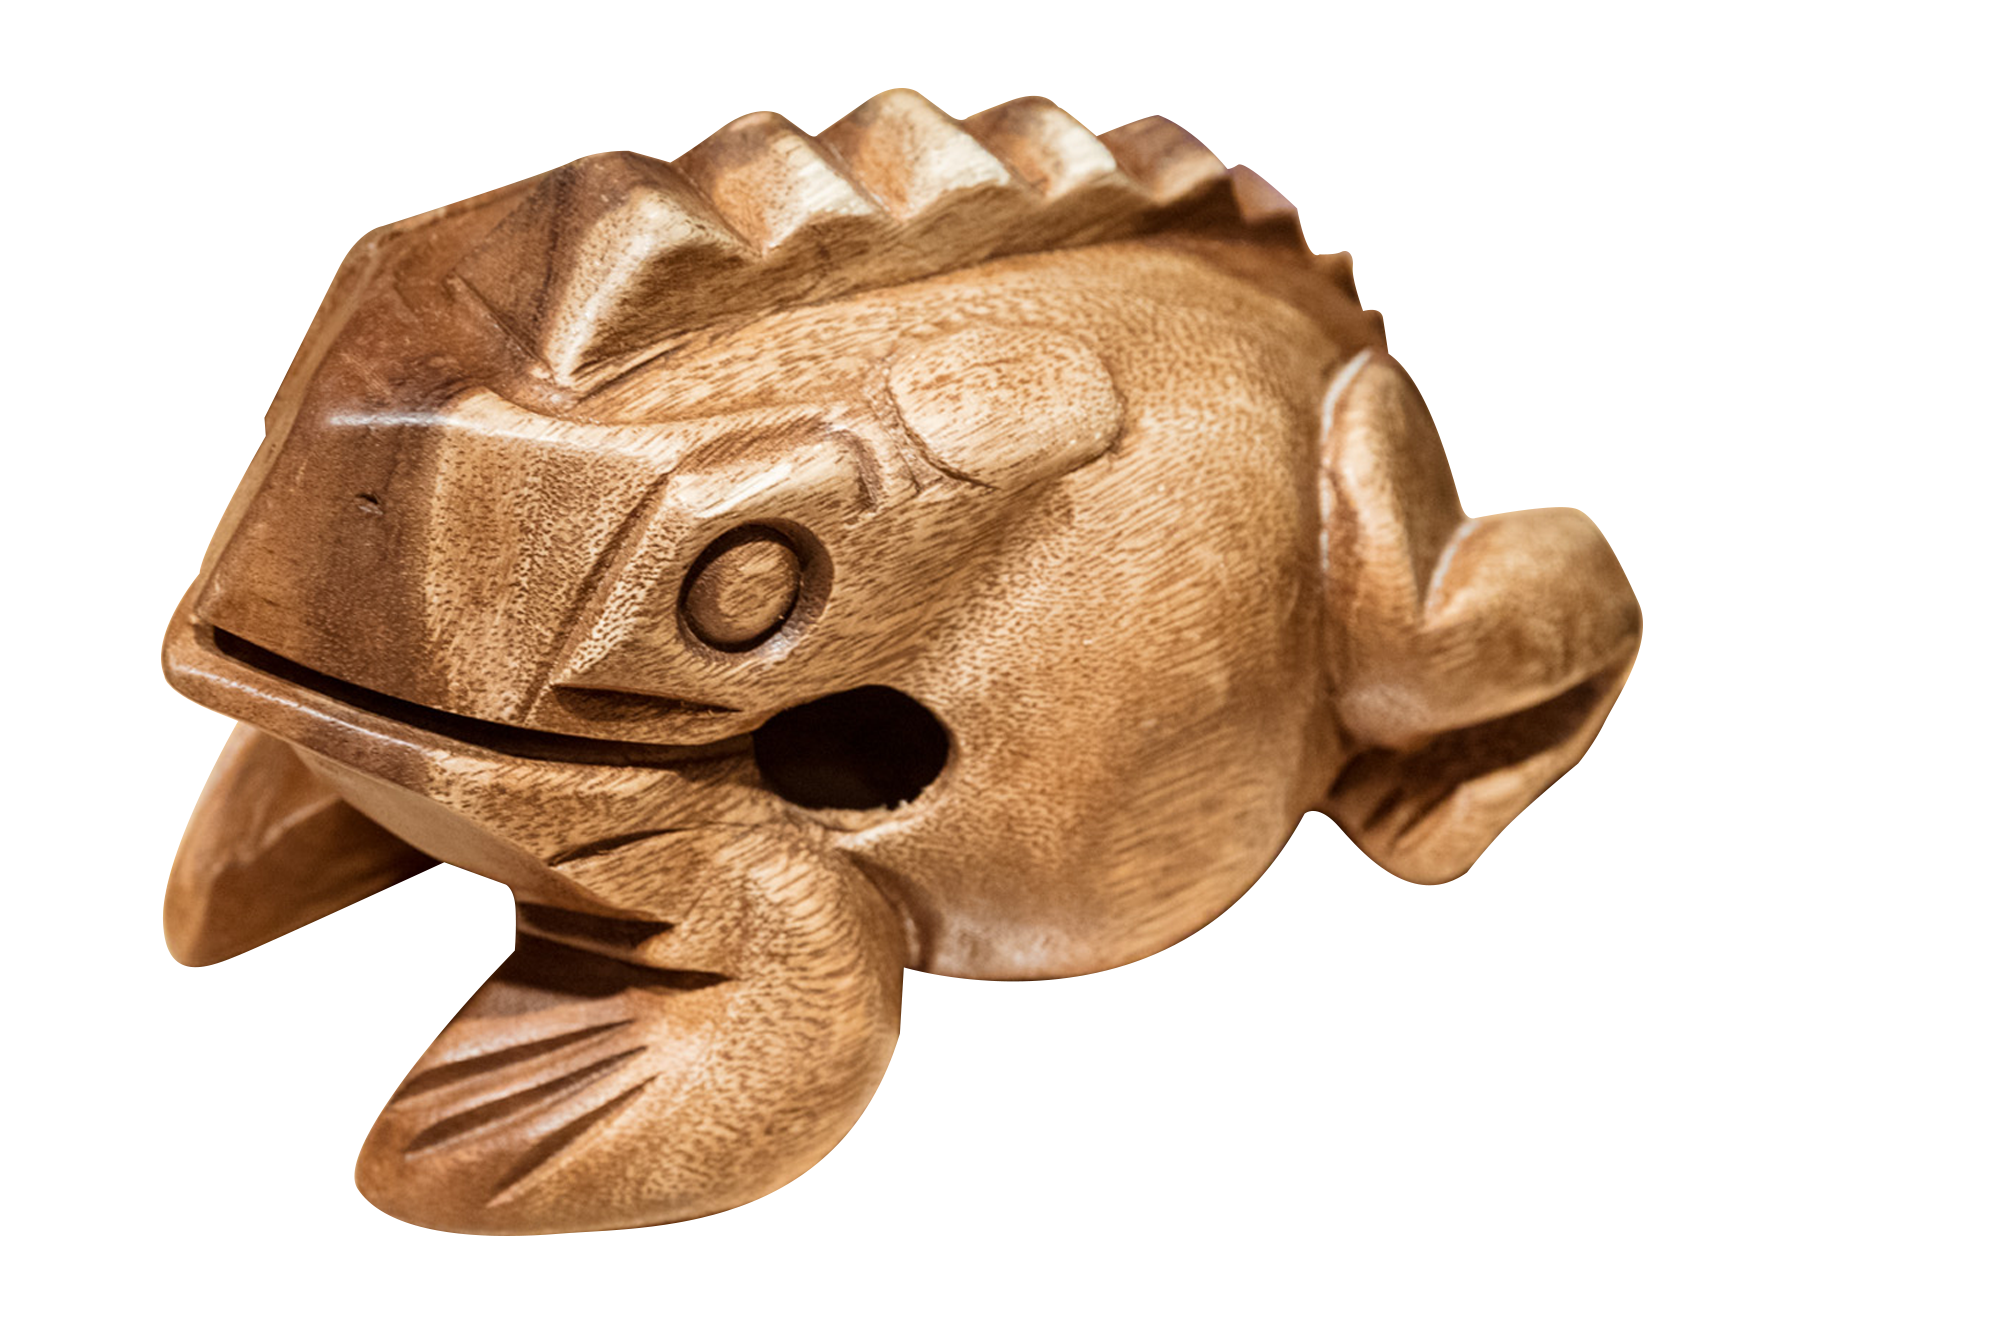 A carved wooden frog to use as a musical instrument